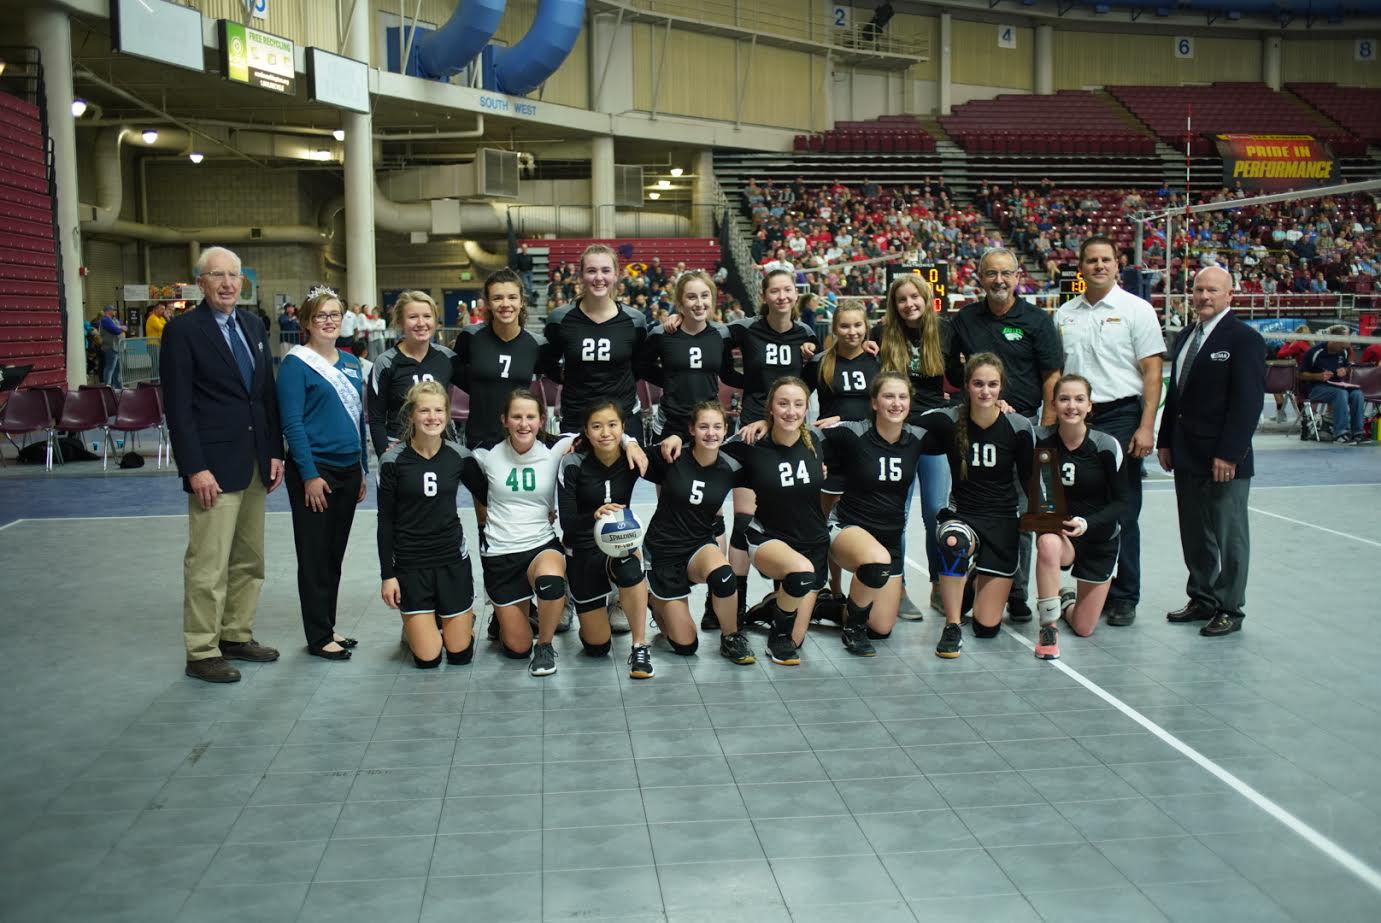 The Firm Foundation volleyball team poses for a team photo after winning the fifth-place trophy Friday at the 1B state volleyball tournament in Yakima.